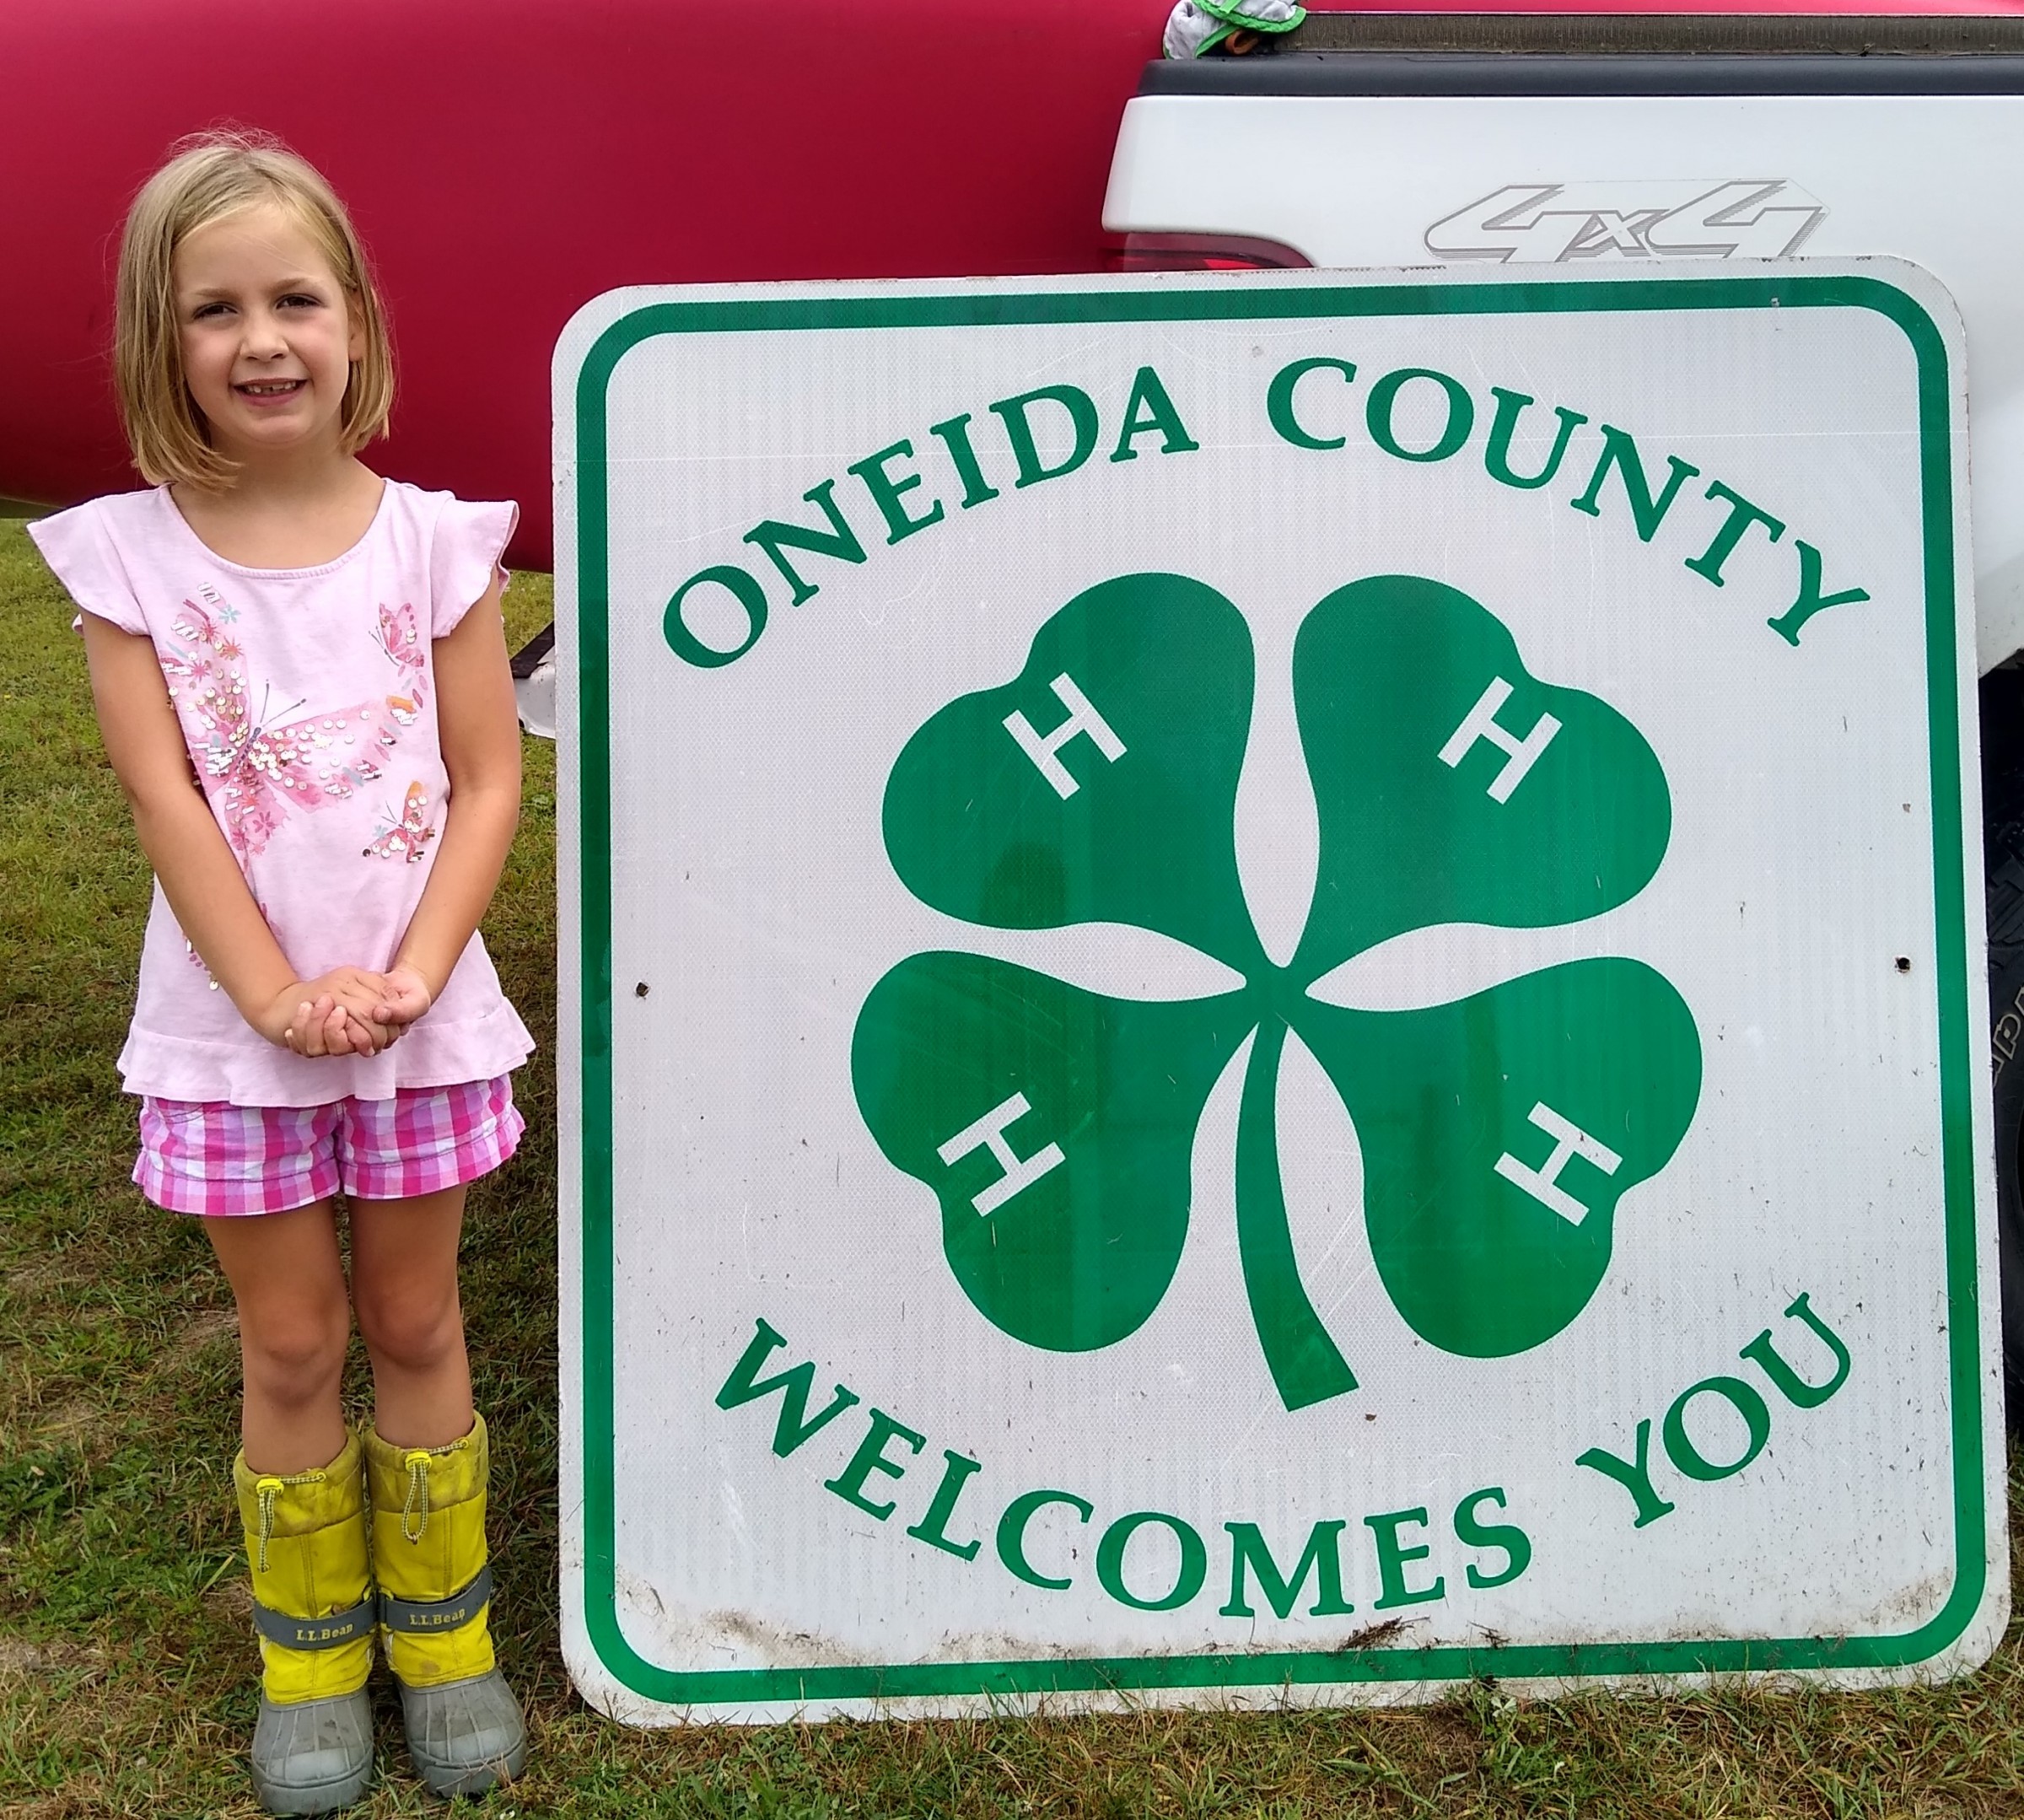 4Her standing next to Oneida County 4H Welcomes You sign